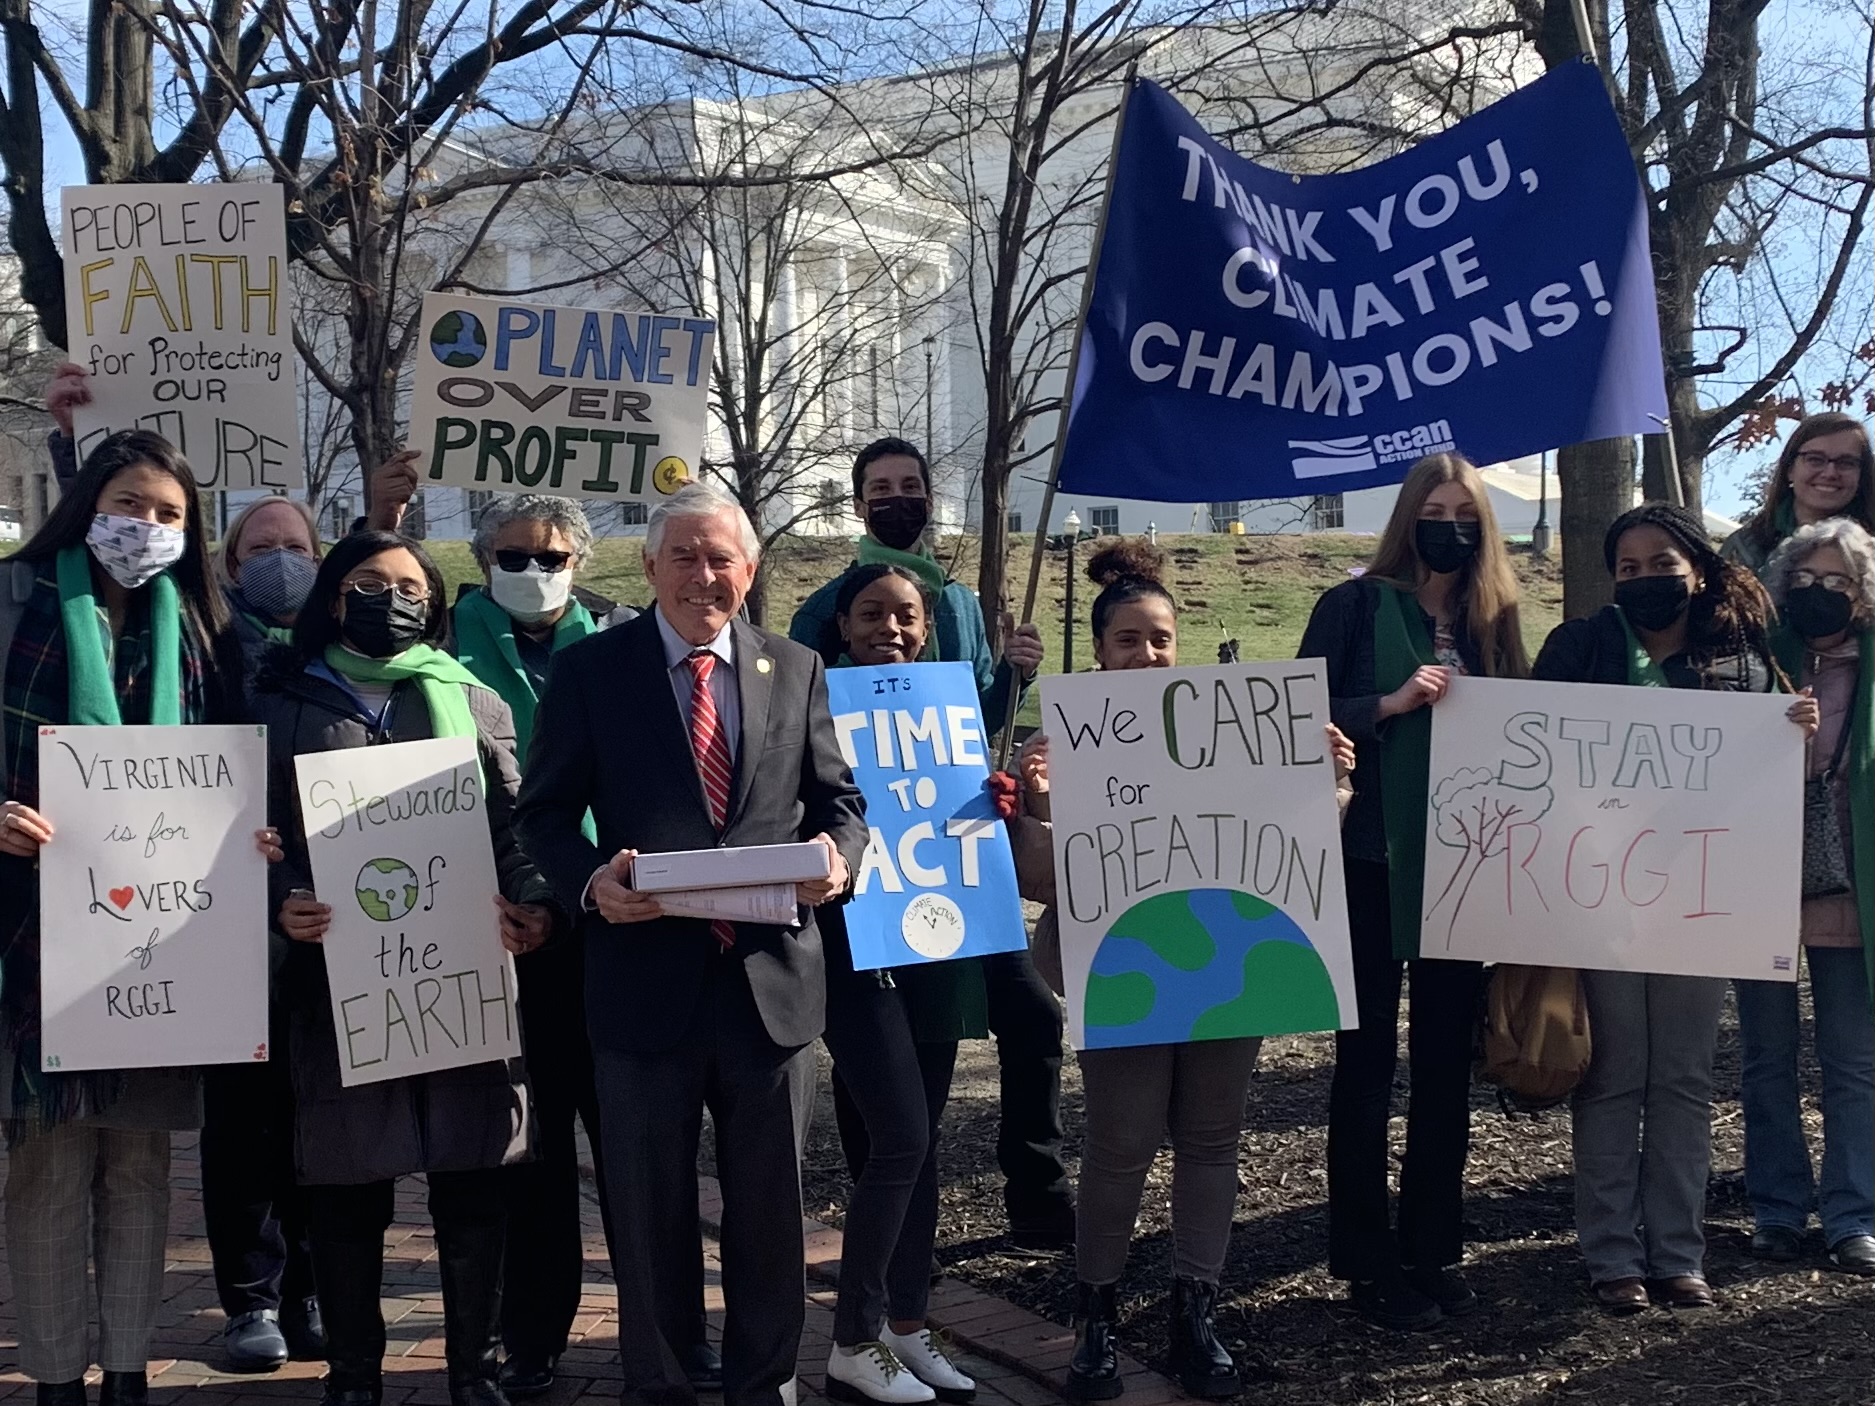 Senator Edwards joins advocates to receive his "Climate Champion" award from CCAN.